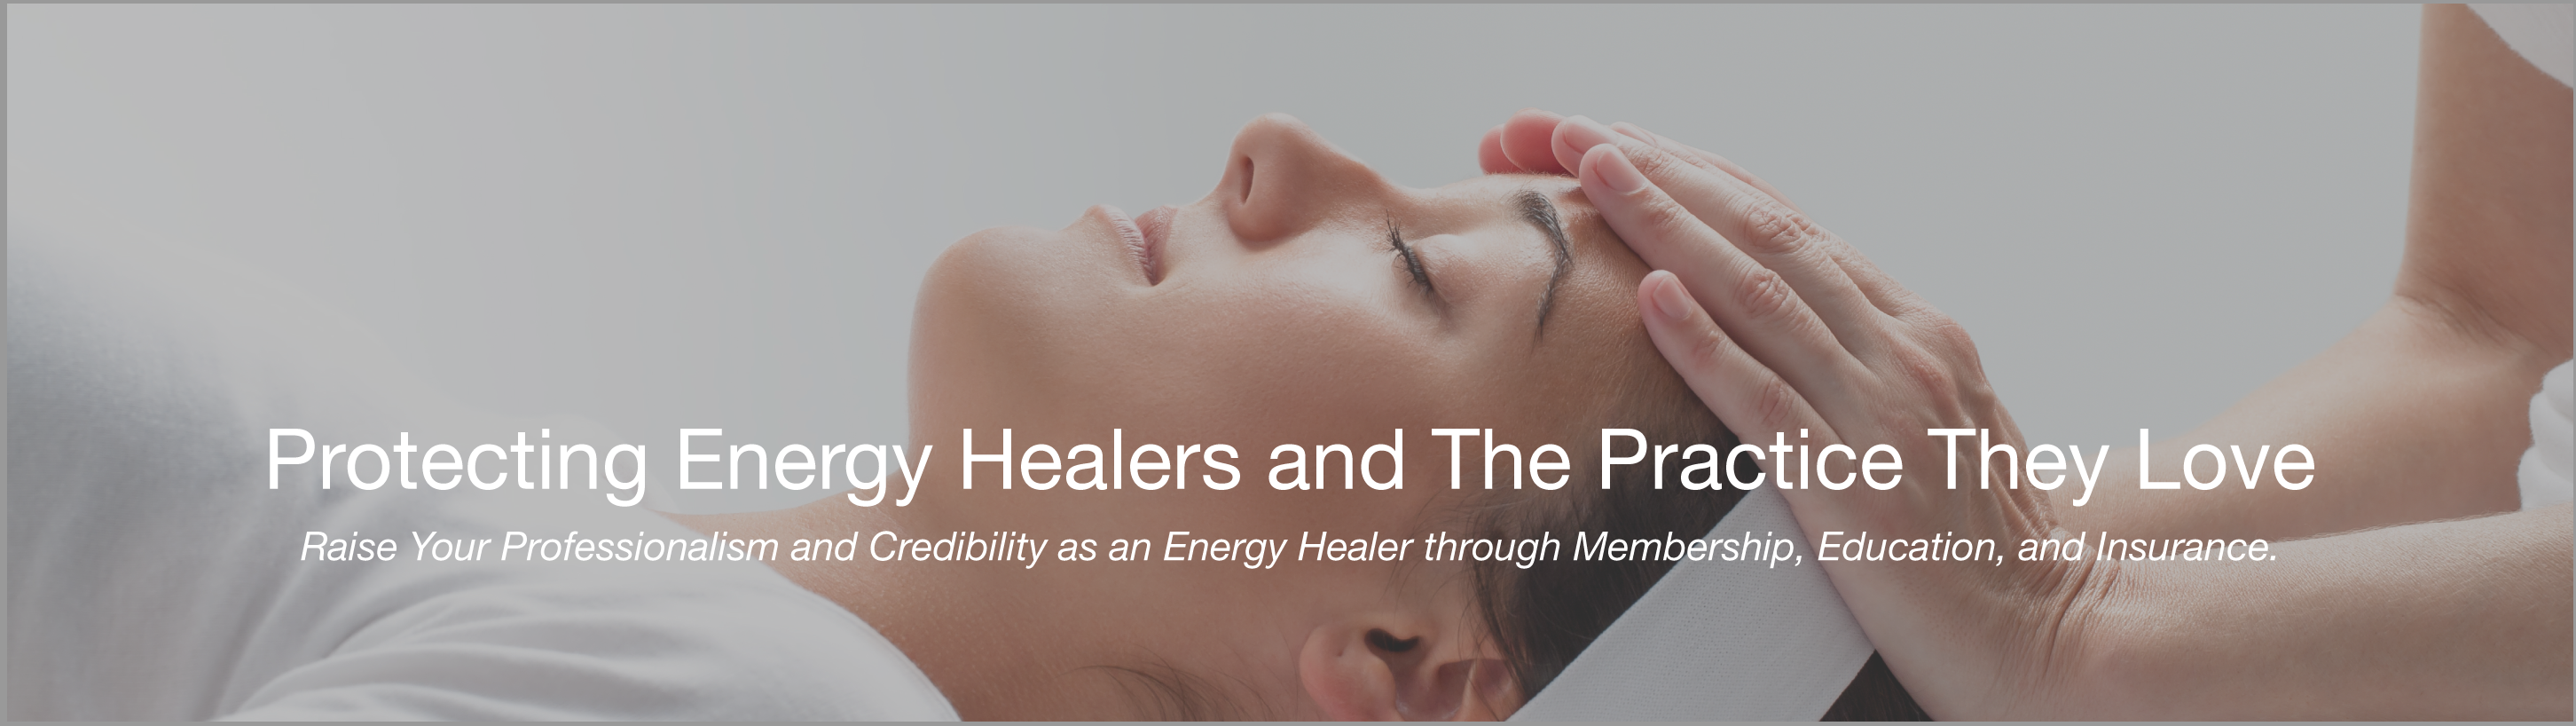 Energy Medicine Professional Association - Protect Your Practice